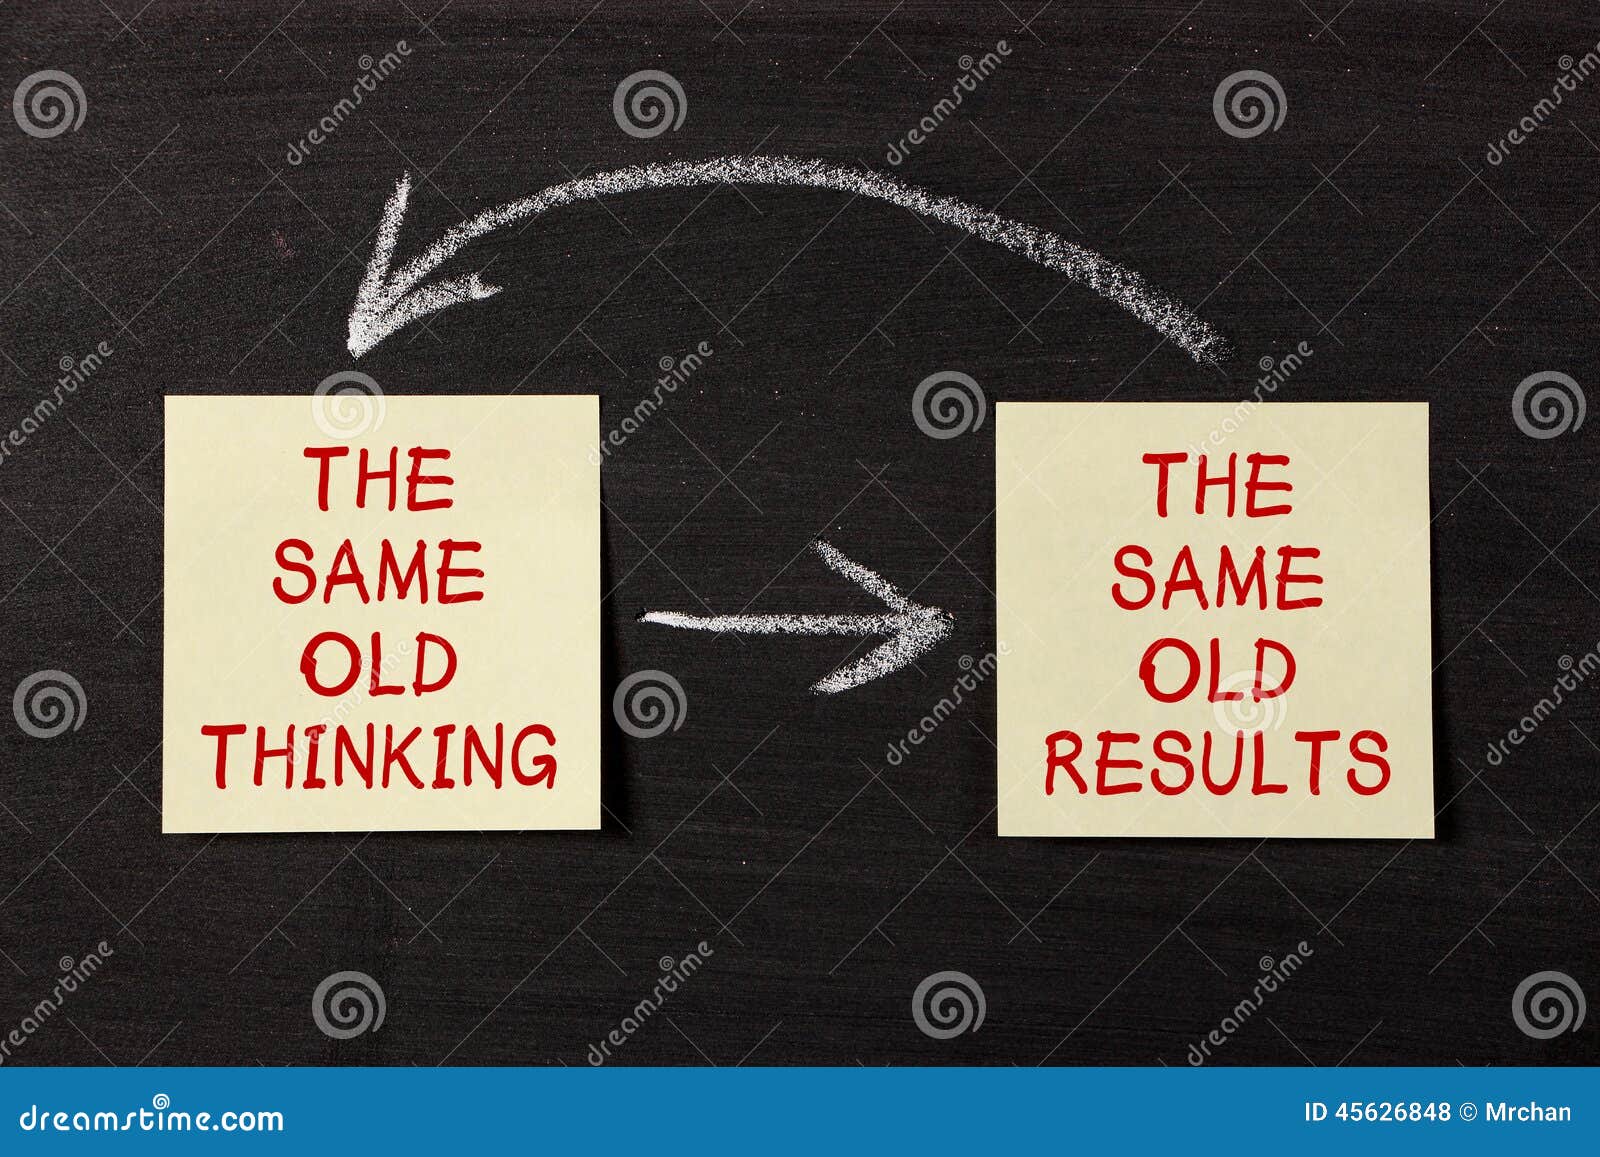 thinking and results mindset